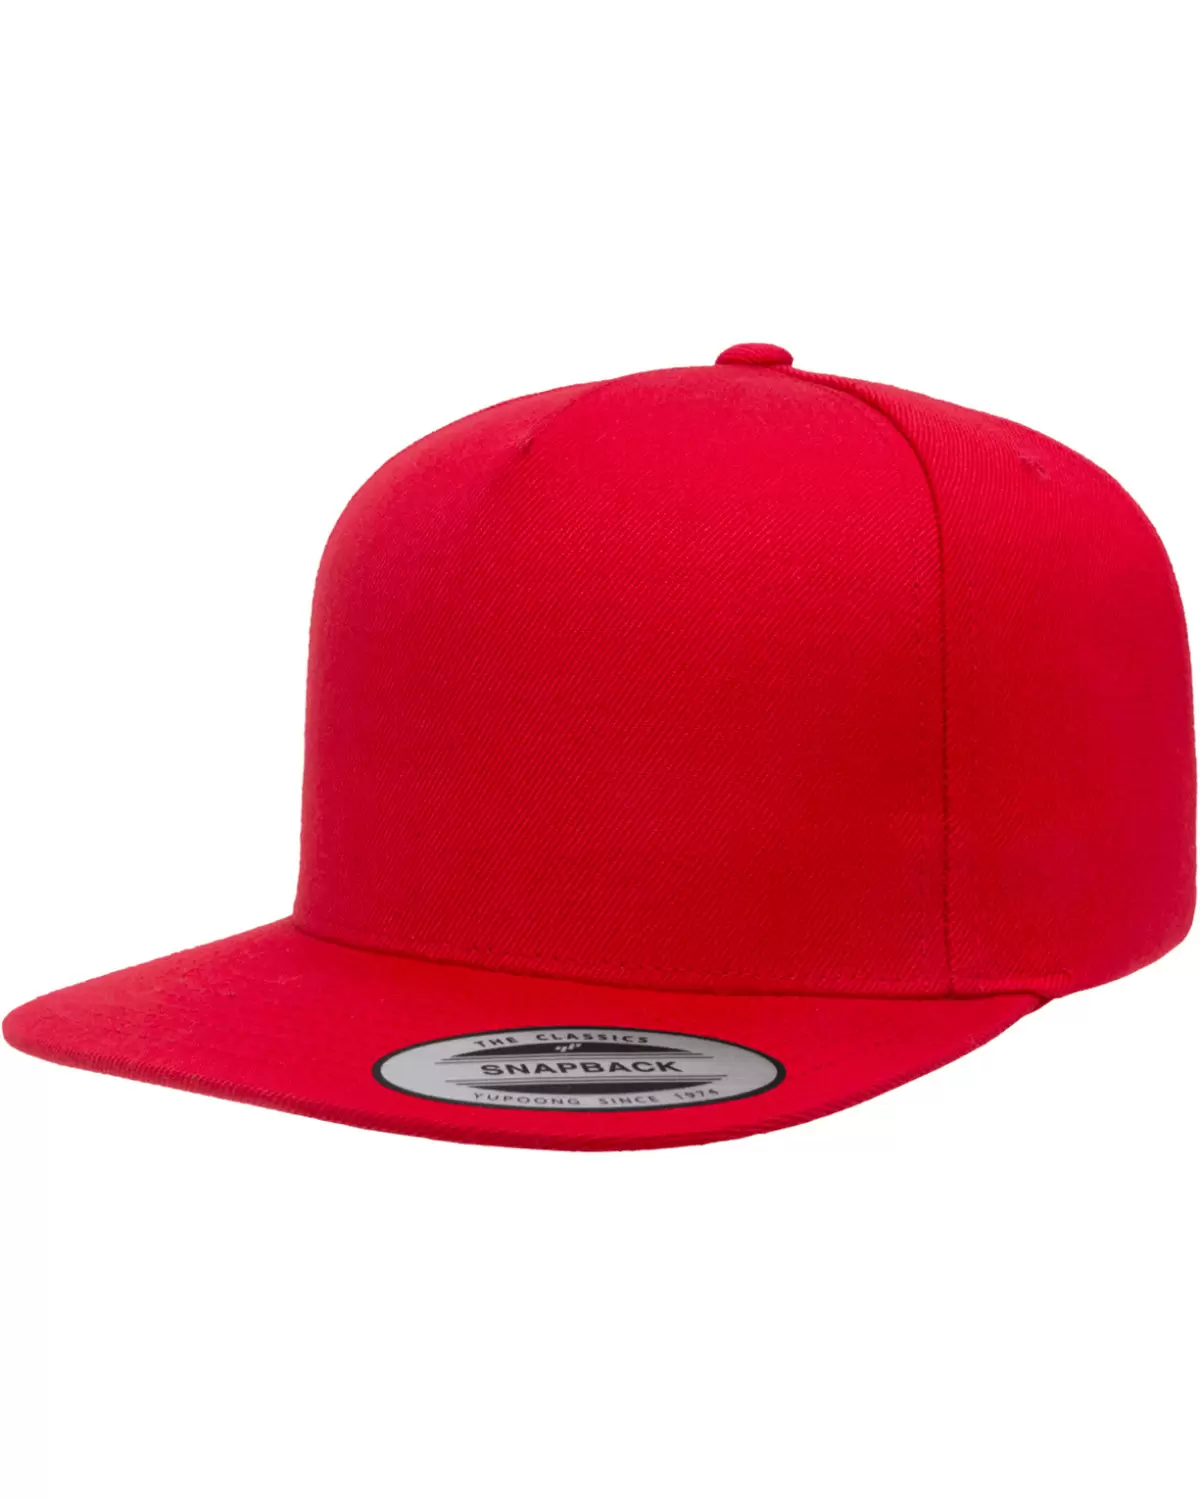 Yupoong 5089M Five From - Snapback Panel Blend Wool